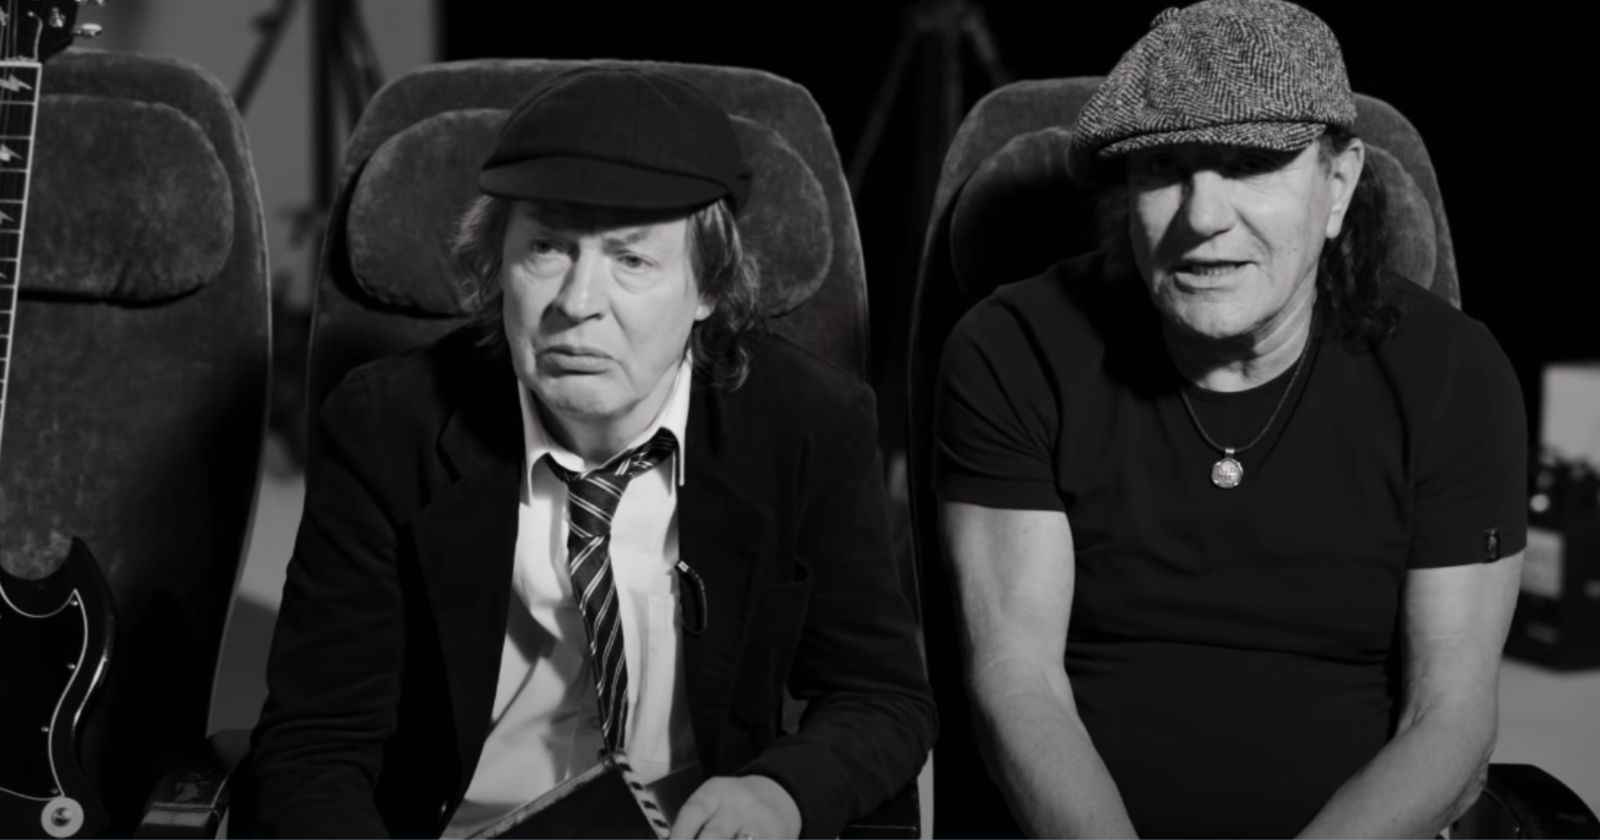 ROCK AND ROLL GARAGE: Angus Young talks about Brian Johnson replacing Bon Scott